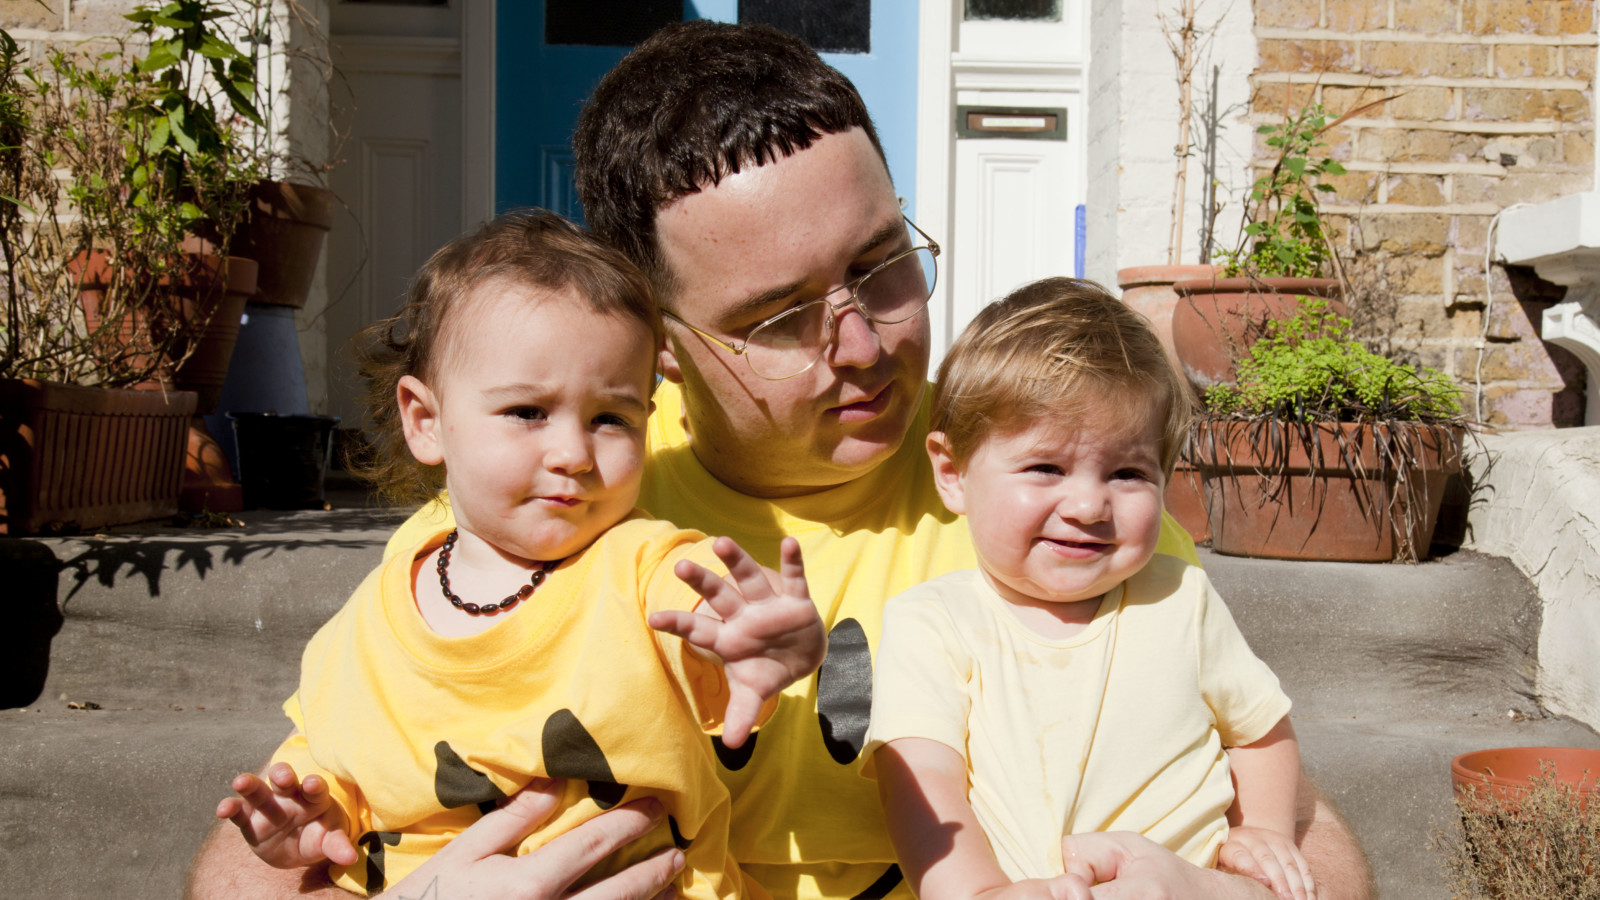 A person with short dark hair and glasses sits on stone steps in front of a blue residential doorway. They are holding two small children with brown hair, one in each arm. They all wear yellow t-shirts. One of the children and the adult wear a yellow t-shirt with a black smiley face on. The adult is looking down at one of the children as the other child reaches out towards the camera.